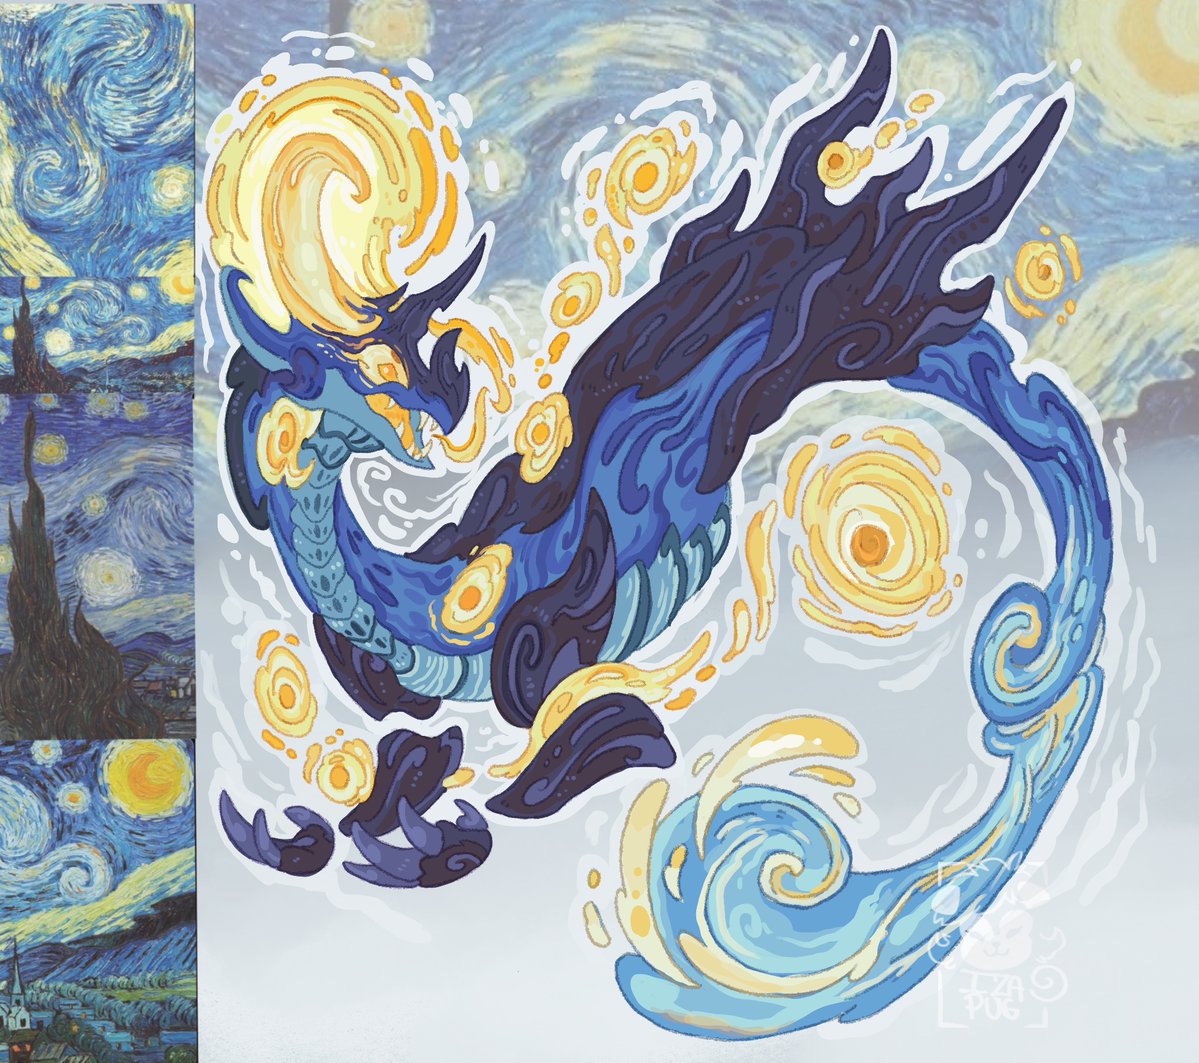 ARTISTS, you can only use ONE art picture to convince people to follow you. Which art piece you using?

well...I offer Van Gogh Dragon 🩵